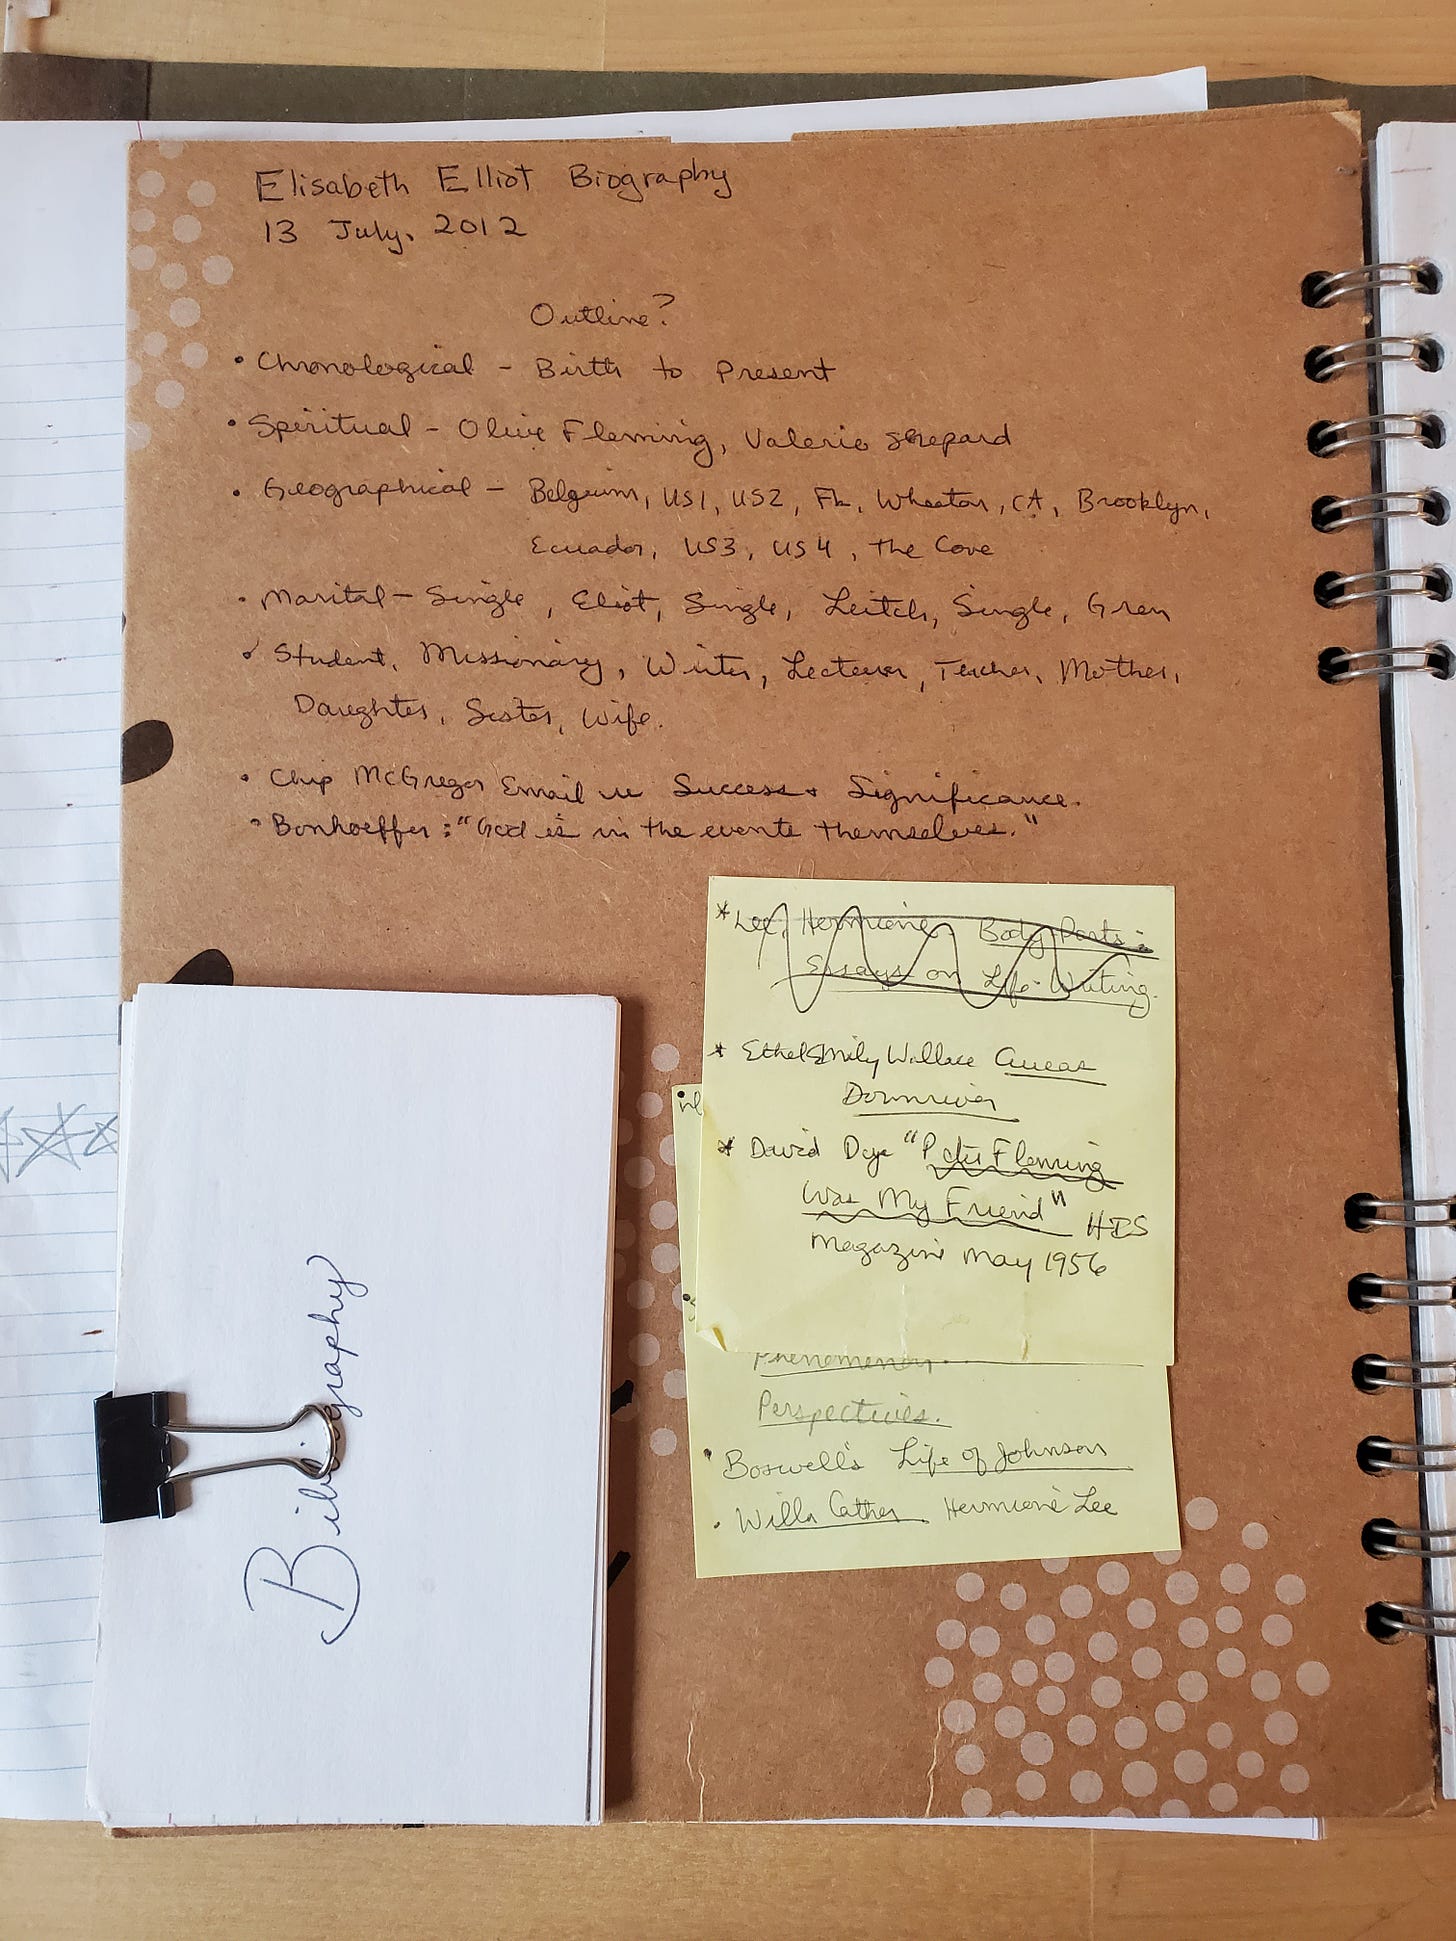 On a brown spiral bound notebook made from recycled paper are the words "Elisabeth Elliot Biography, 13 July, 2012" and notes about various approaches to an outline. Clipped to one corner are a stack of 3x5 cards labeled "Bibliography," and in another corner are yellow post-it notes with lists of books and articles to get copies of. 